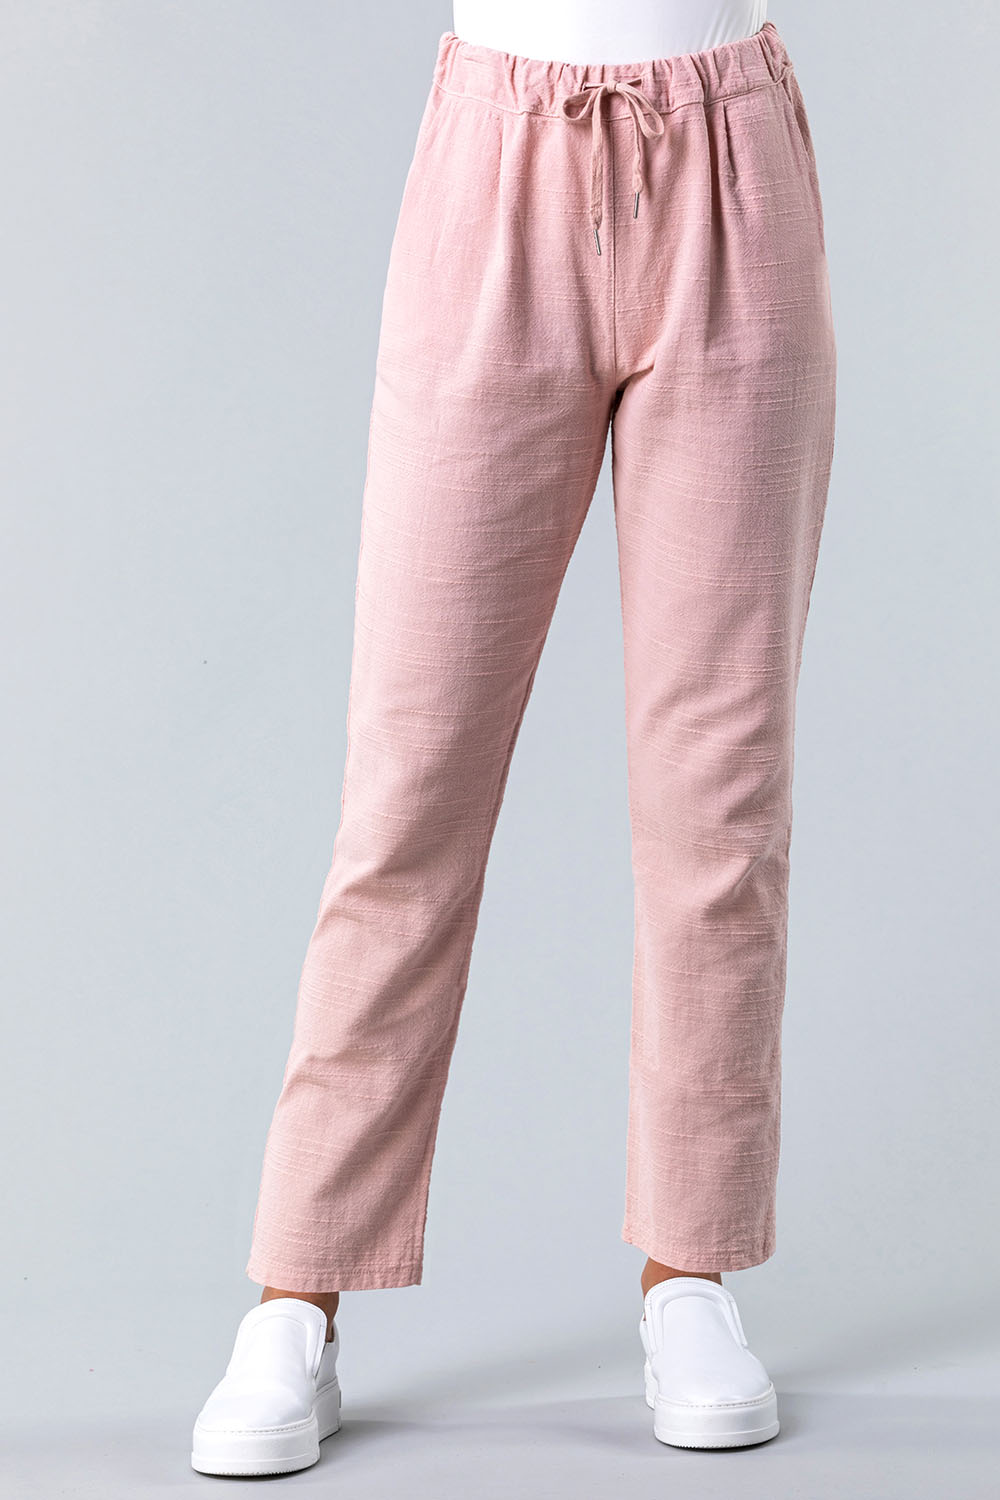 Light Pink Woven Tie Front Joggers, Image 2 of 4